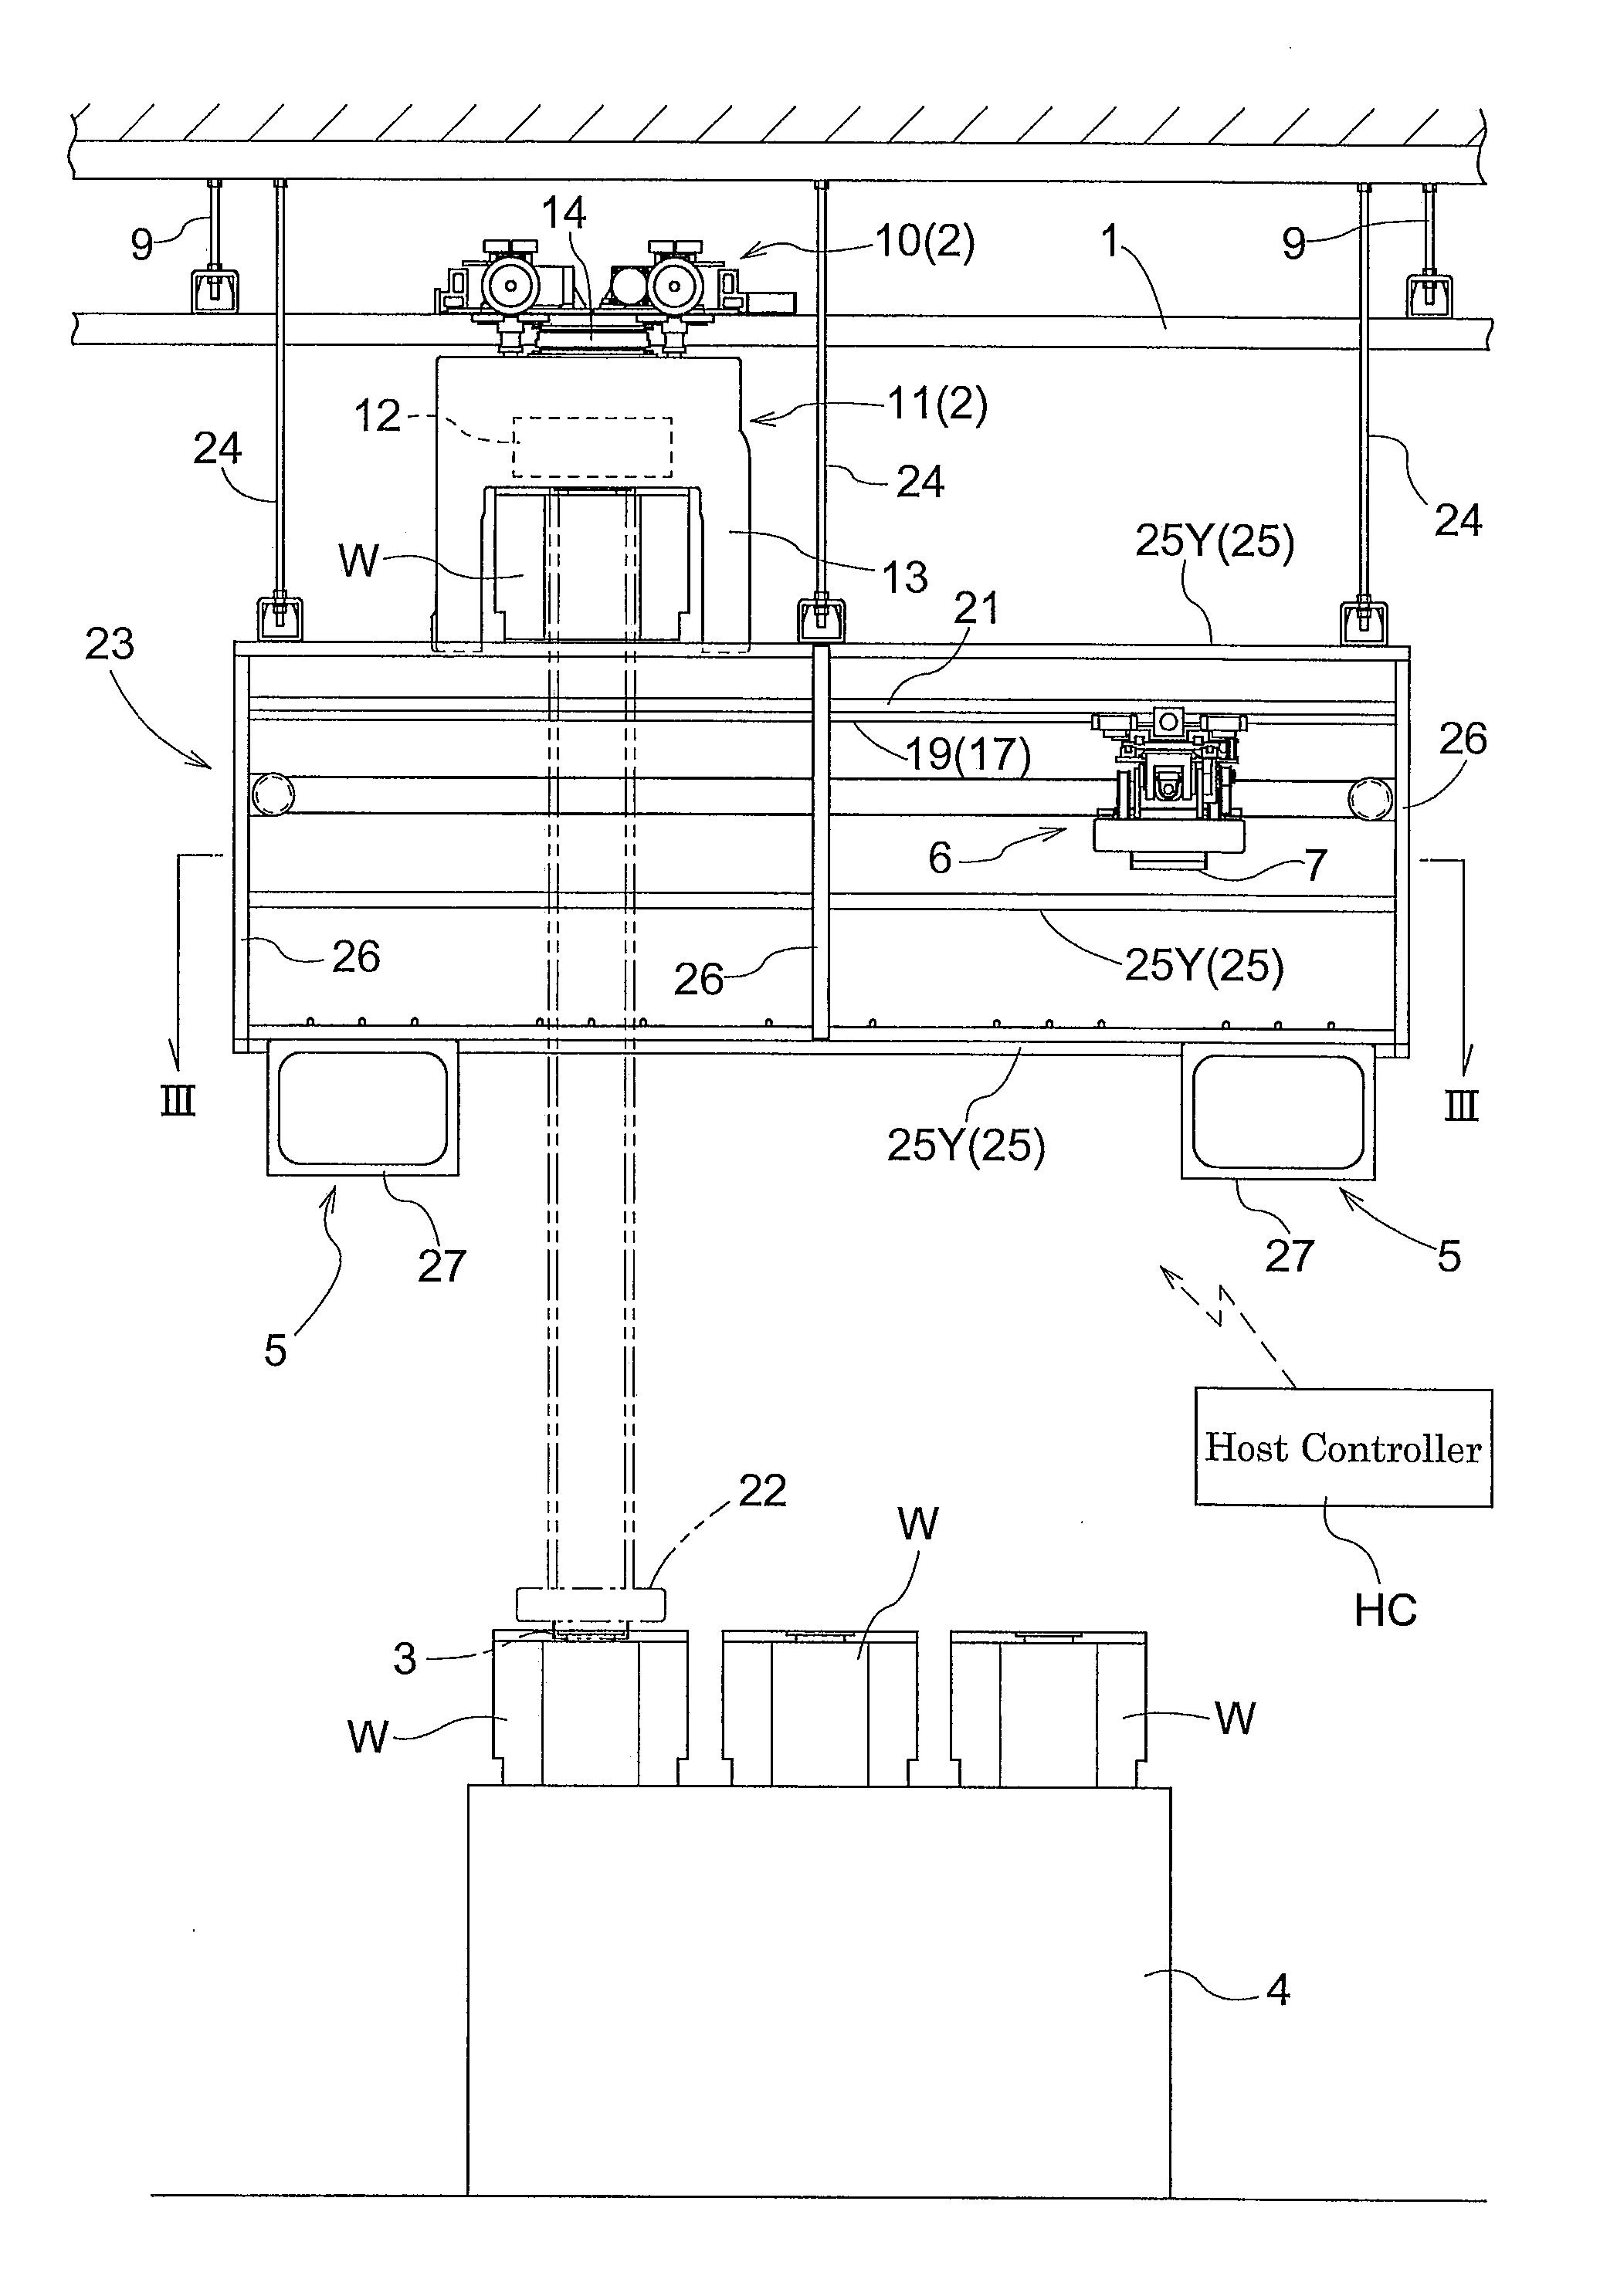 Article transport facility with intermediate transfer device